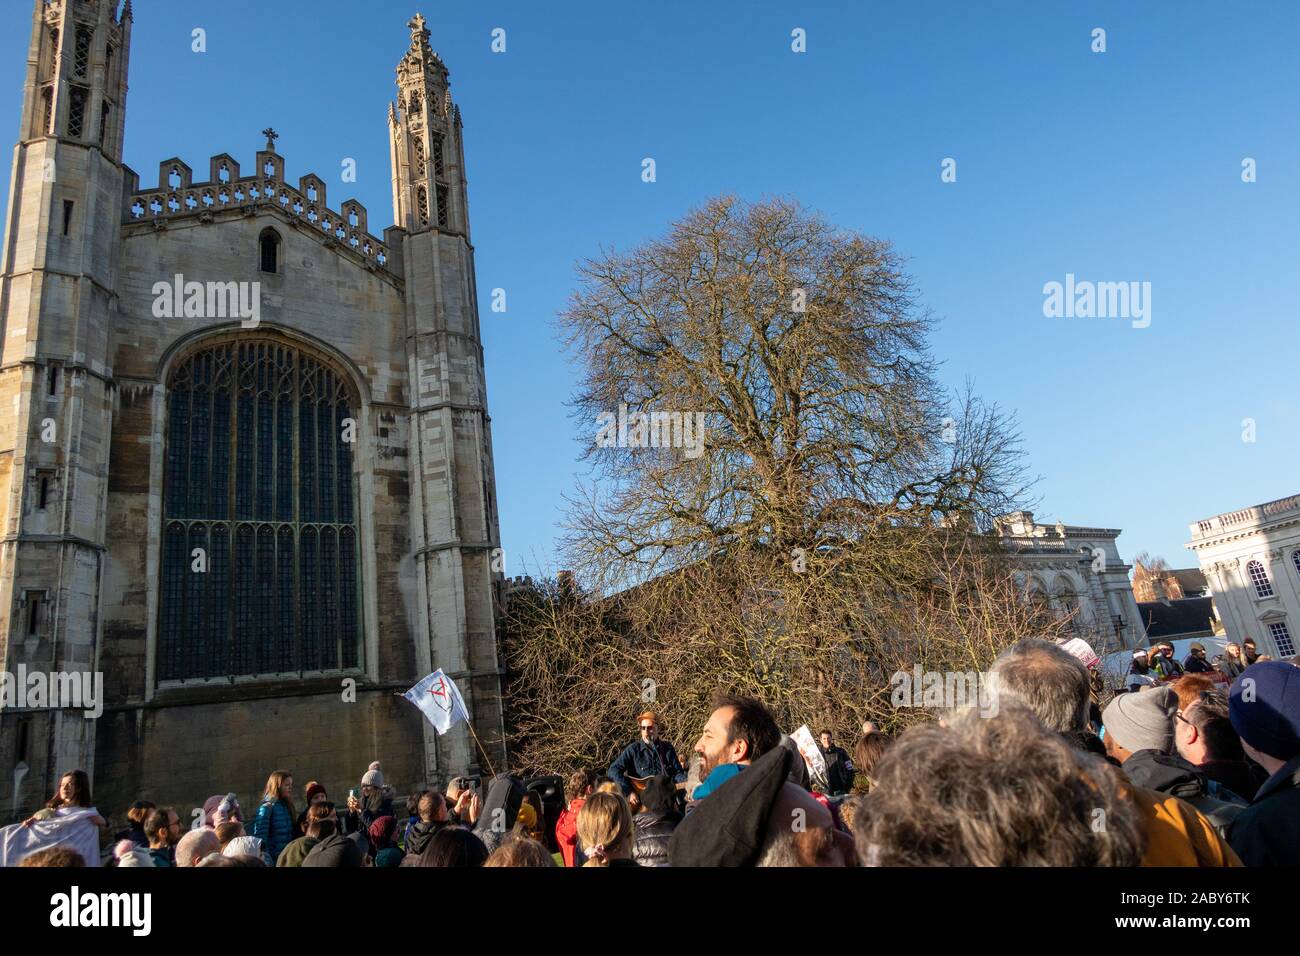 University workers are to strike for eight days in disputes over pay and pensions. In front of Cambridge Univeriy Kings College England Stock Photo